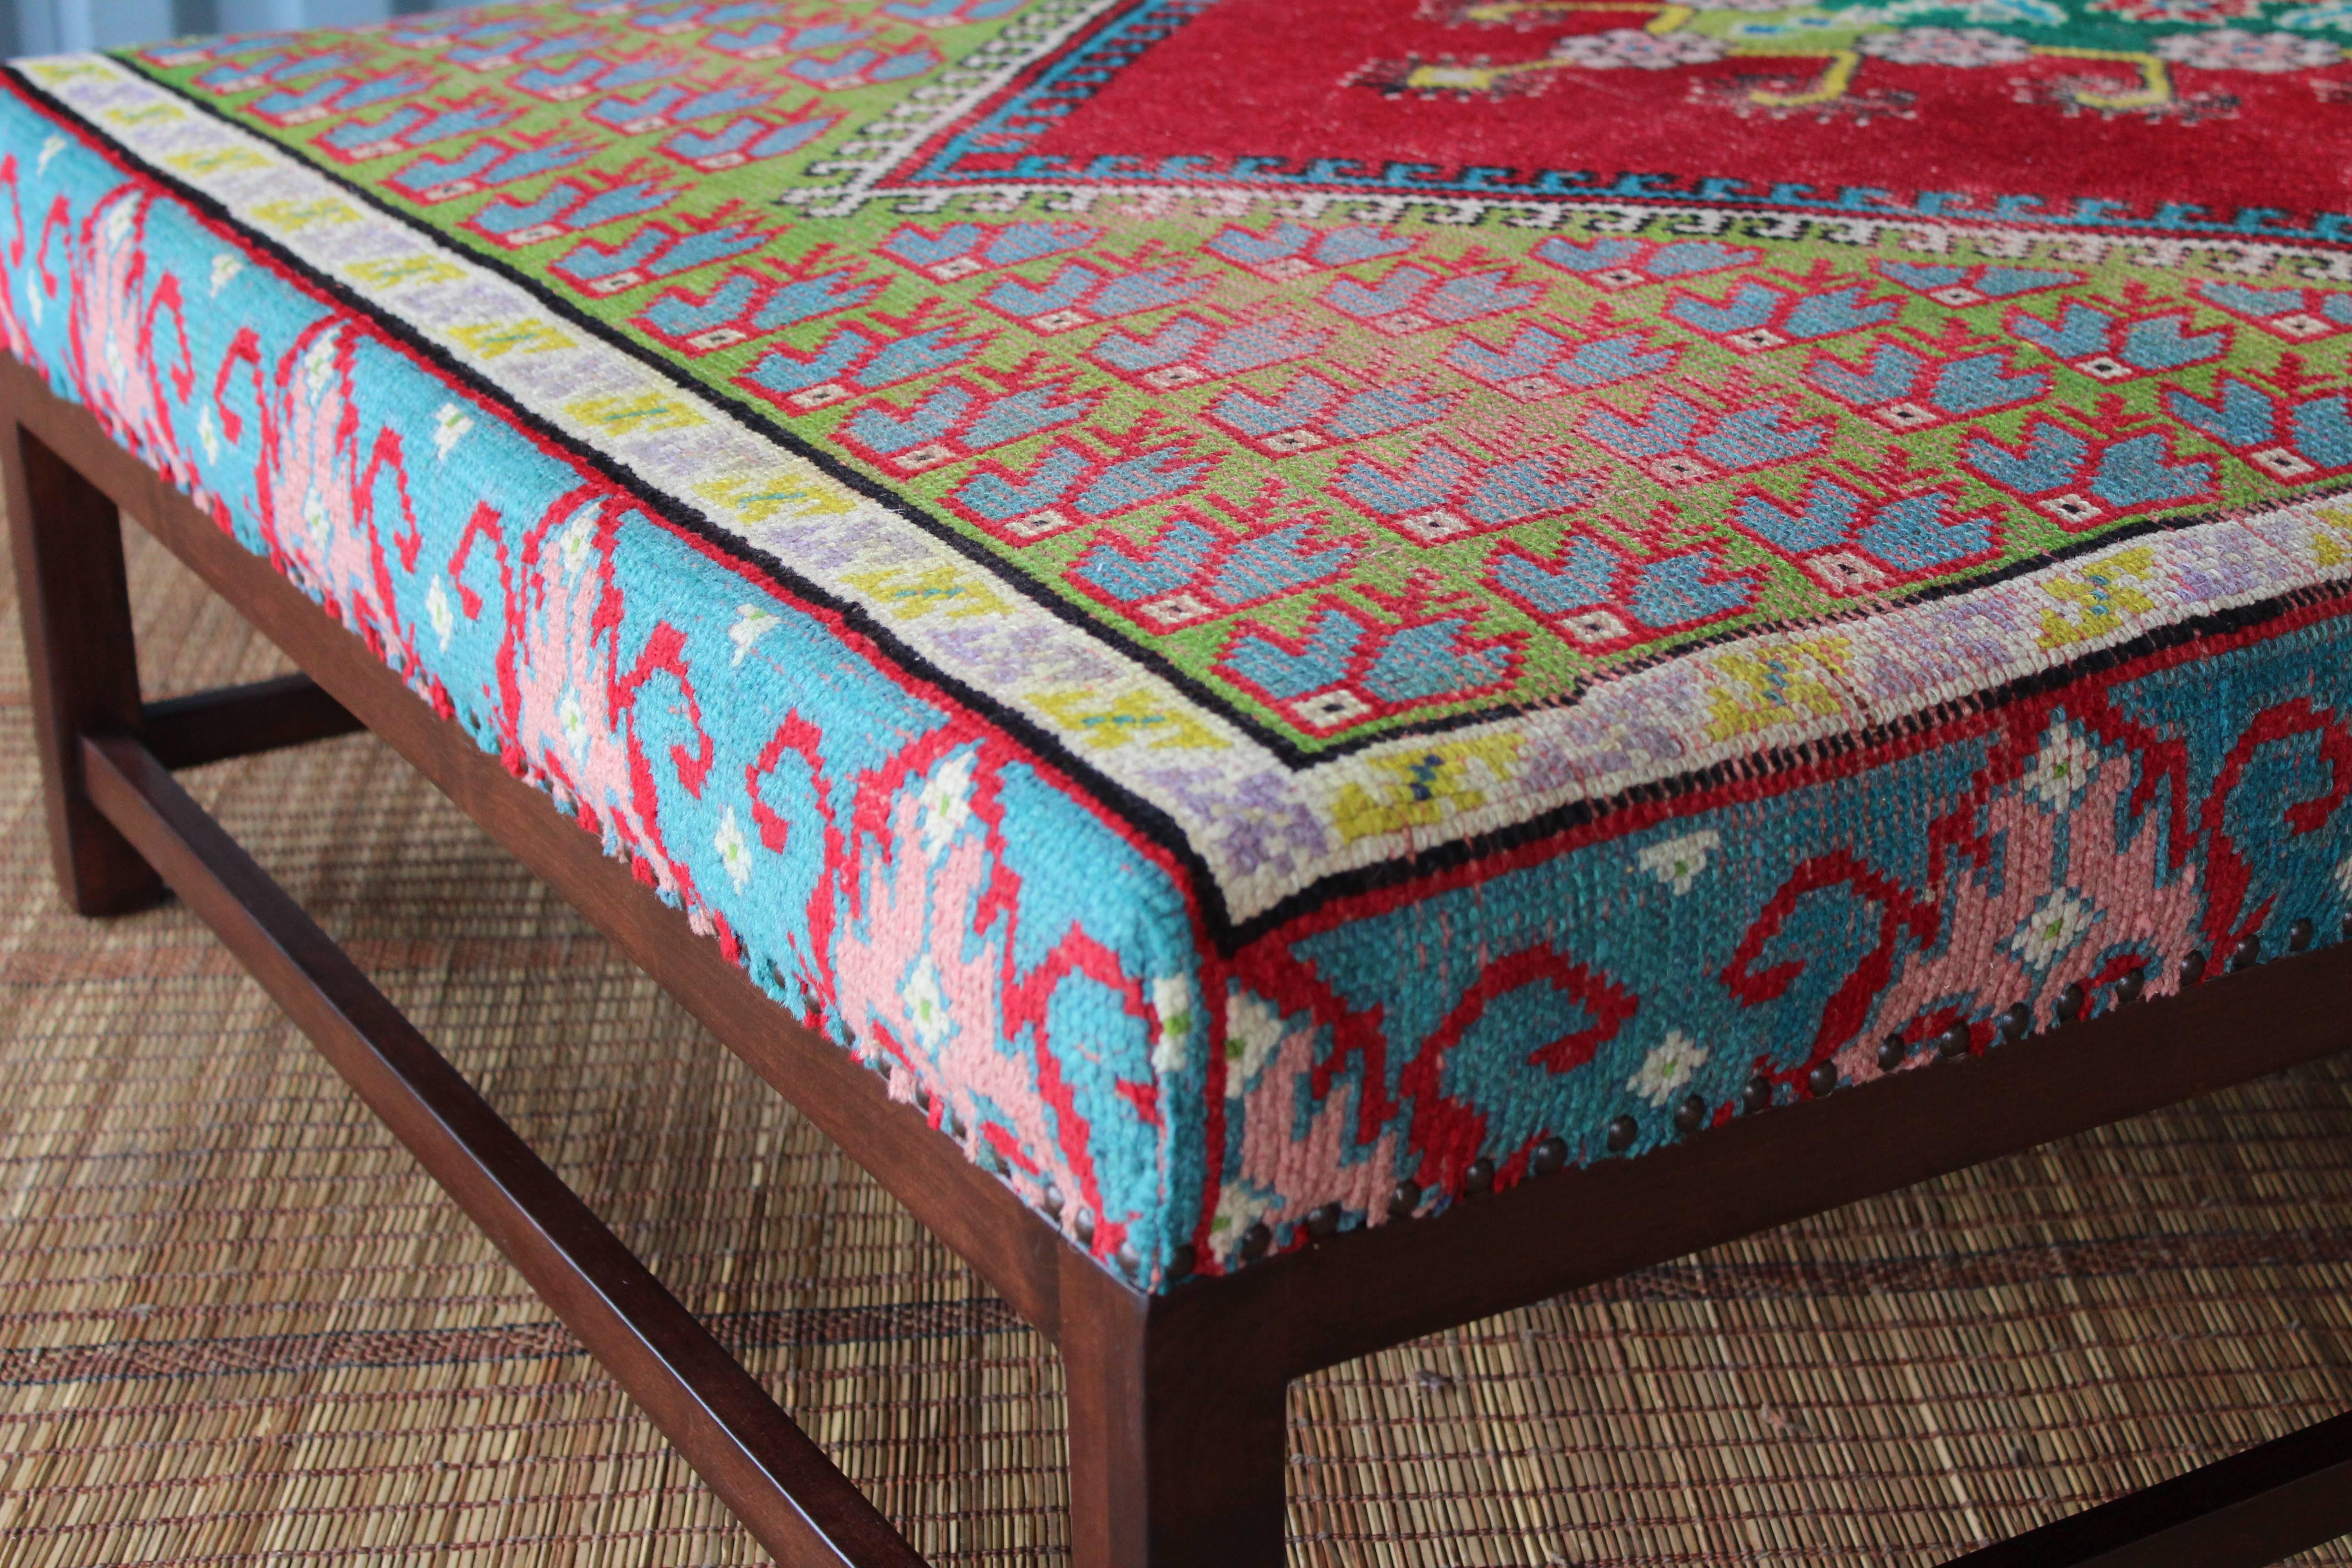 American Lexington Ottoman by Hollywood at Home